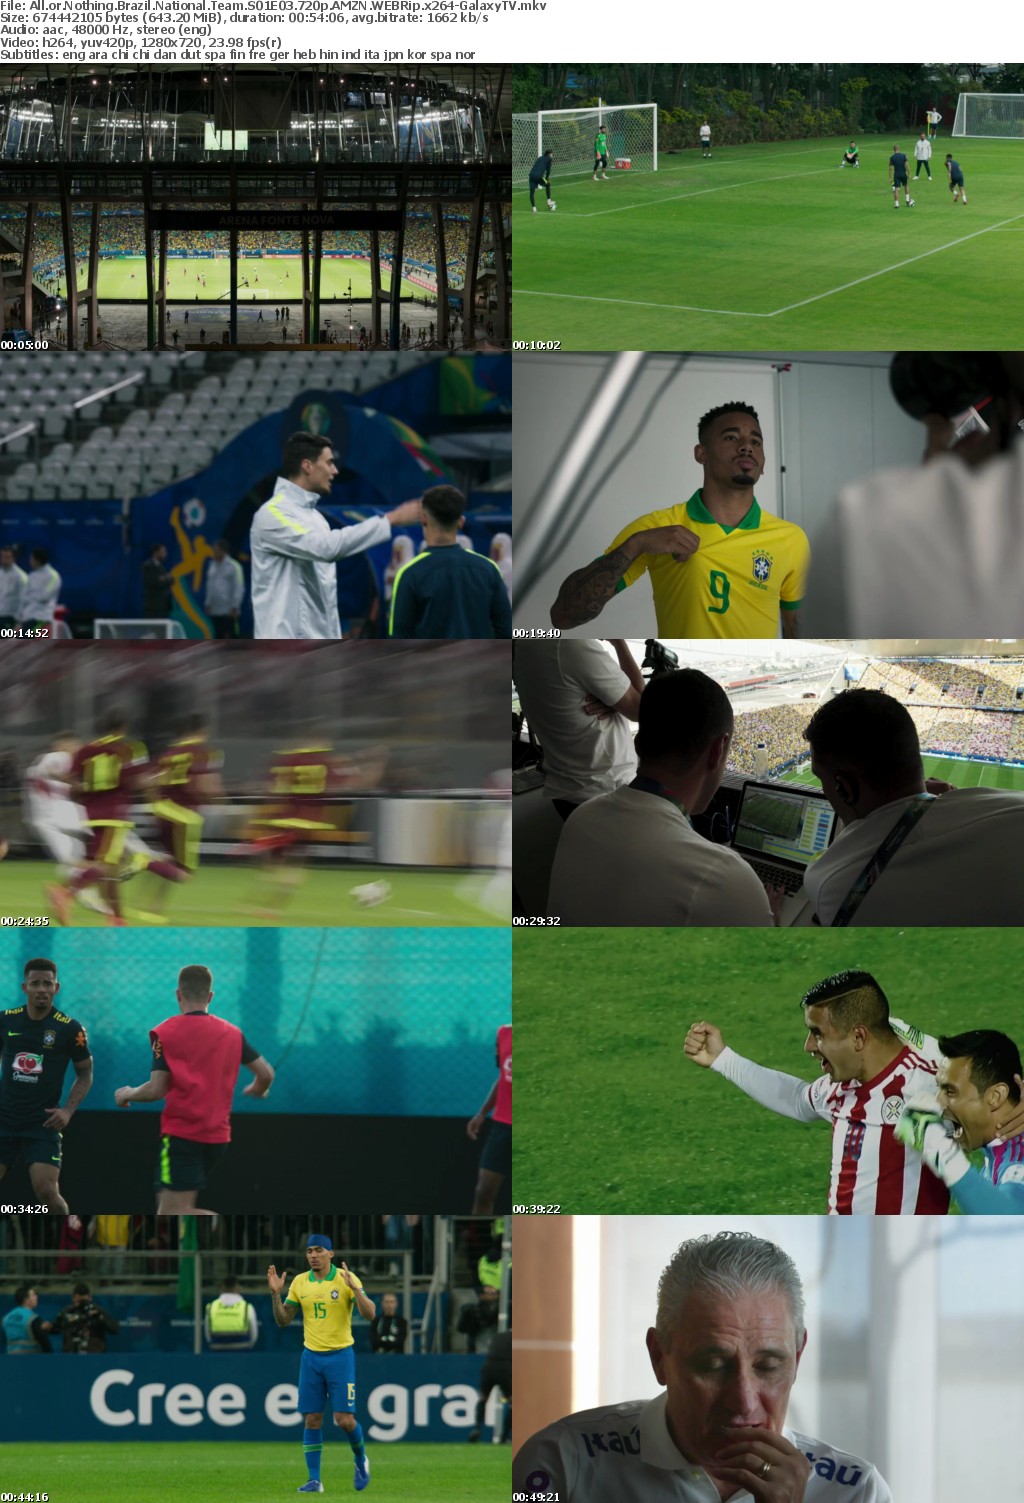 All or Nothing Brazil National Team S01 COMPLETE 720p AMZN WEBRip x264-GalaxyTV